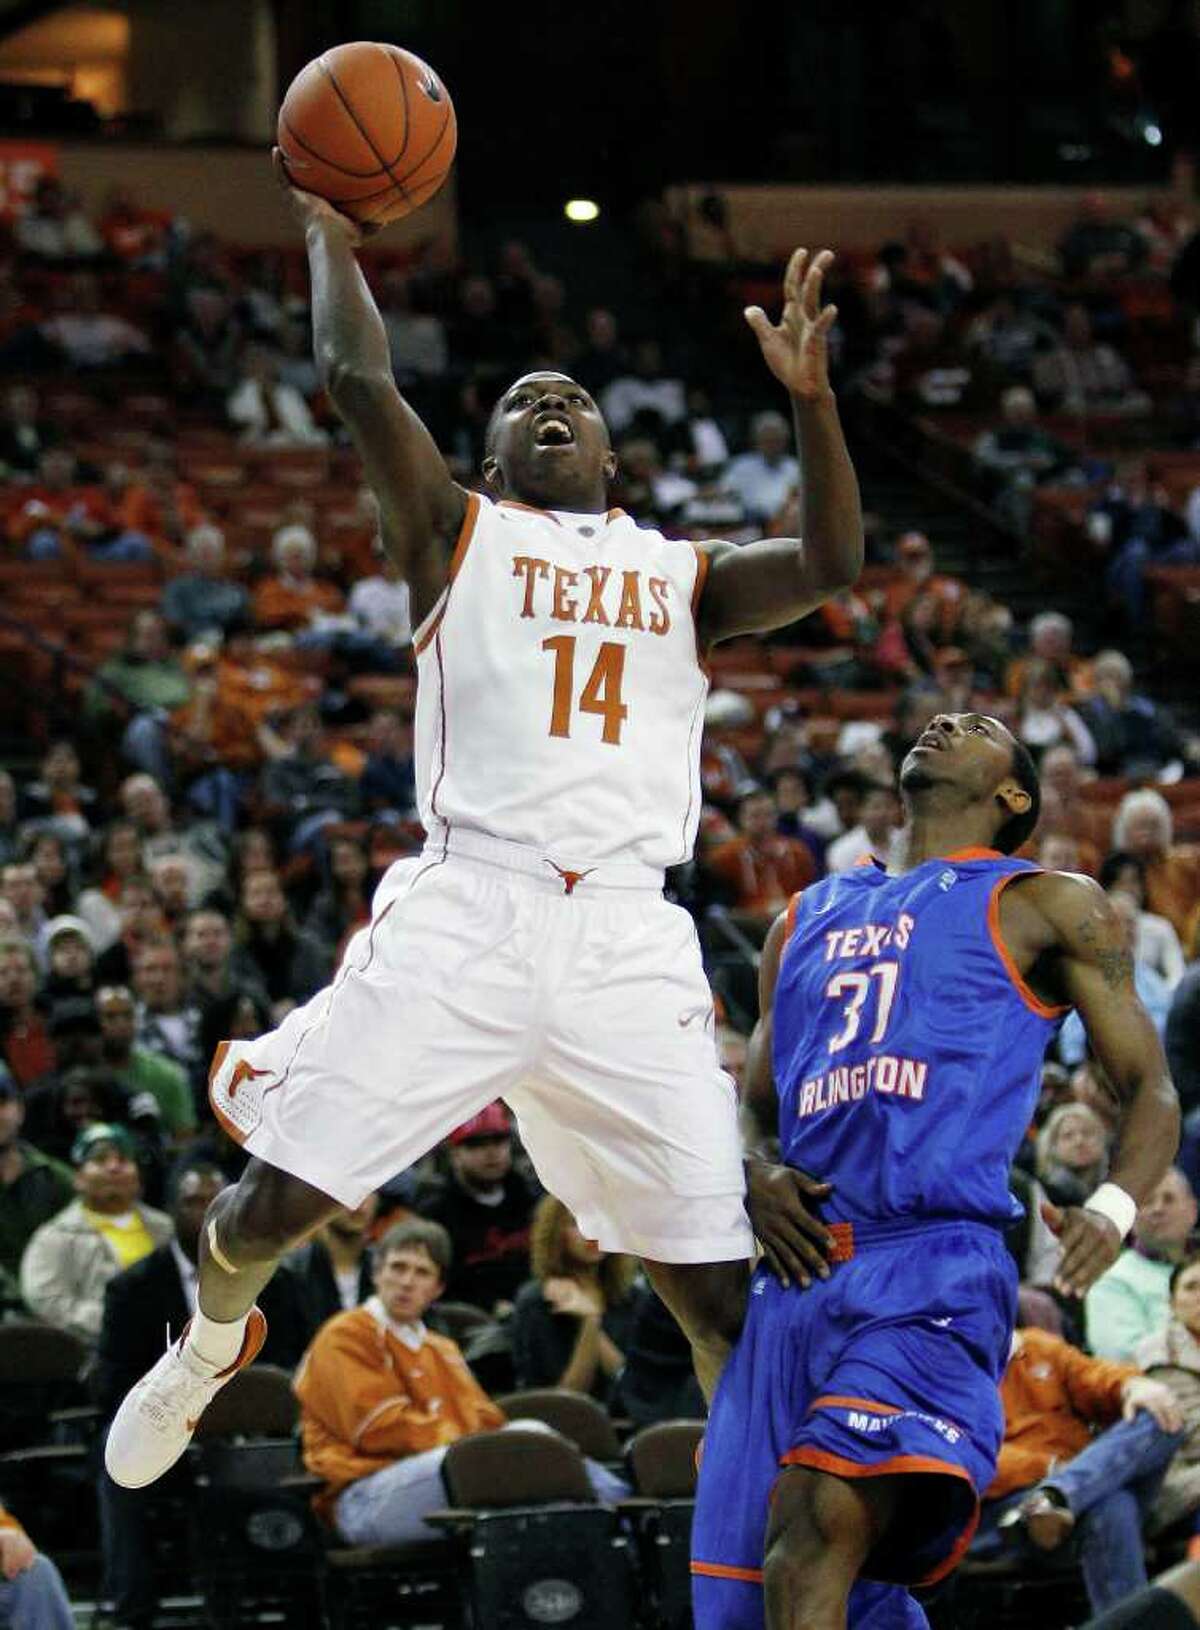 Texas guard J’Covan Brown puts up a shot over Texas-Arlington’s LaMarcus Reed III during the first half Tuesday night at the Erwin Center.